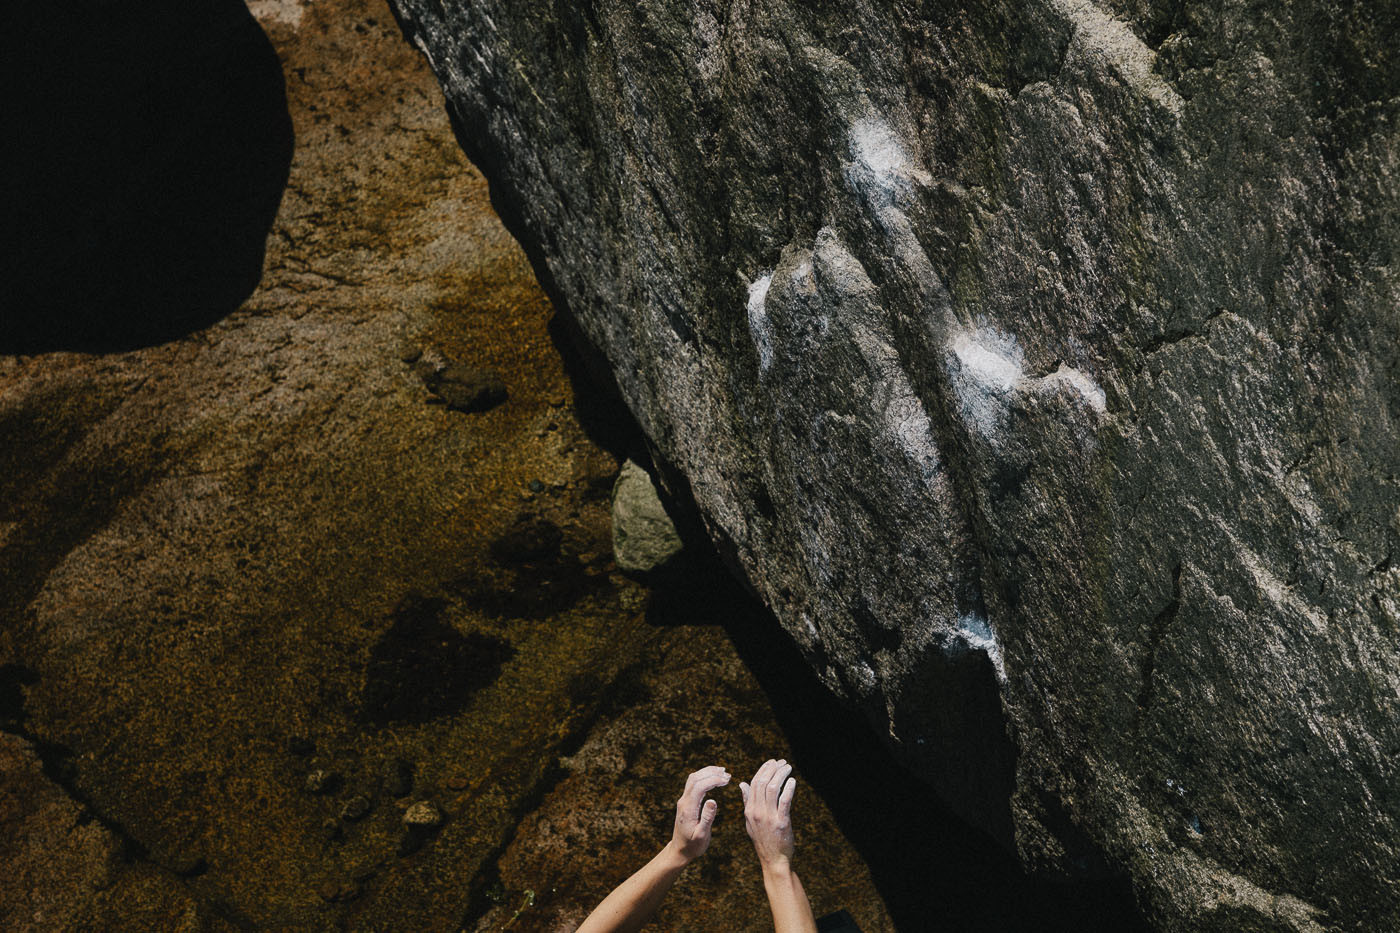 Heidi Genesis mimes the moves on First Love (V4) at the Riverbed Boulders in Bukansan National Park, South Korea